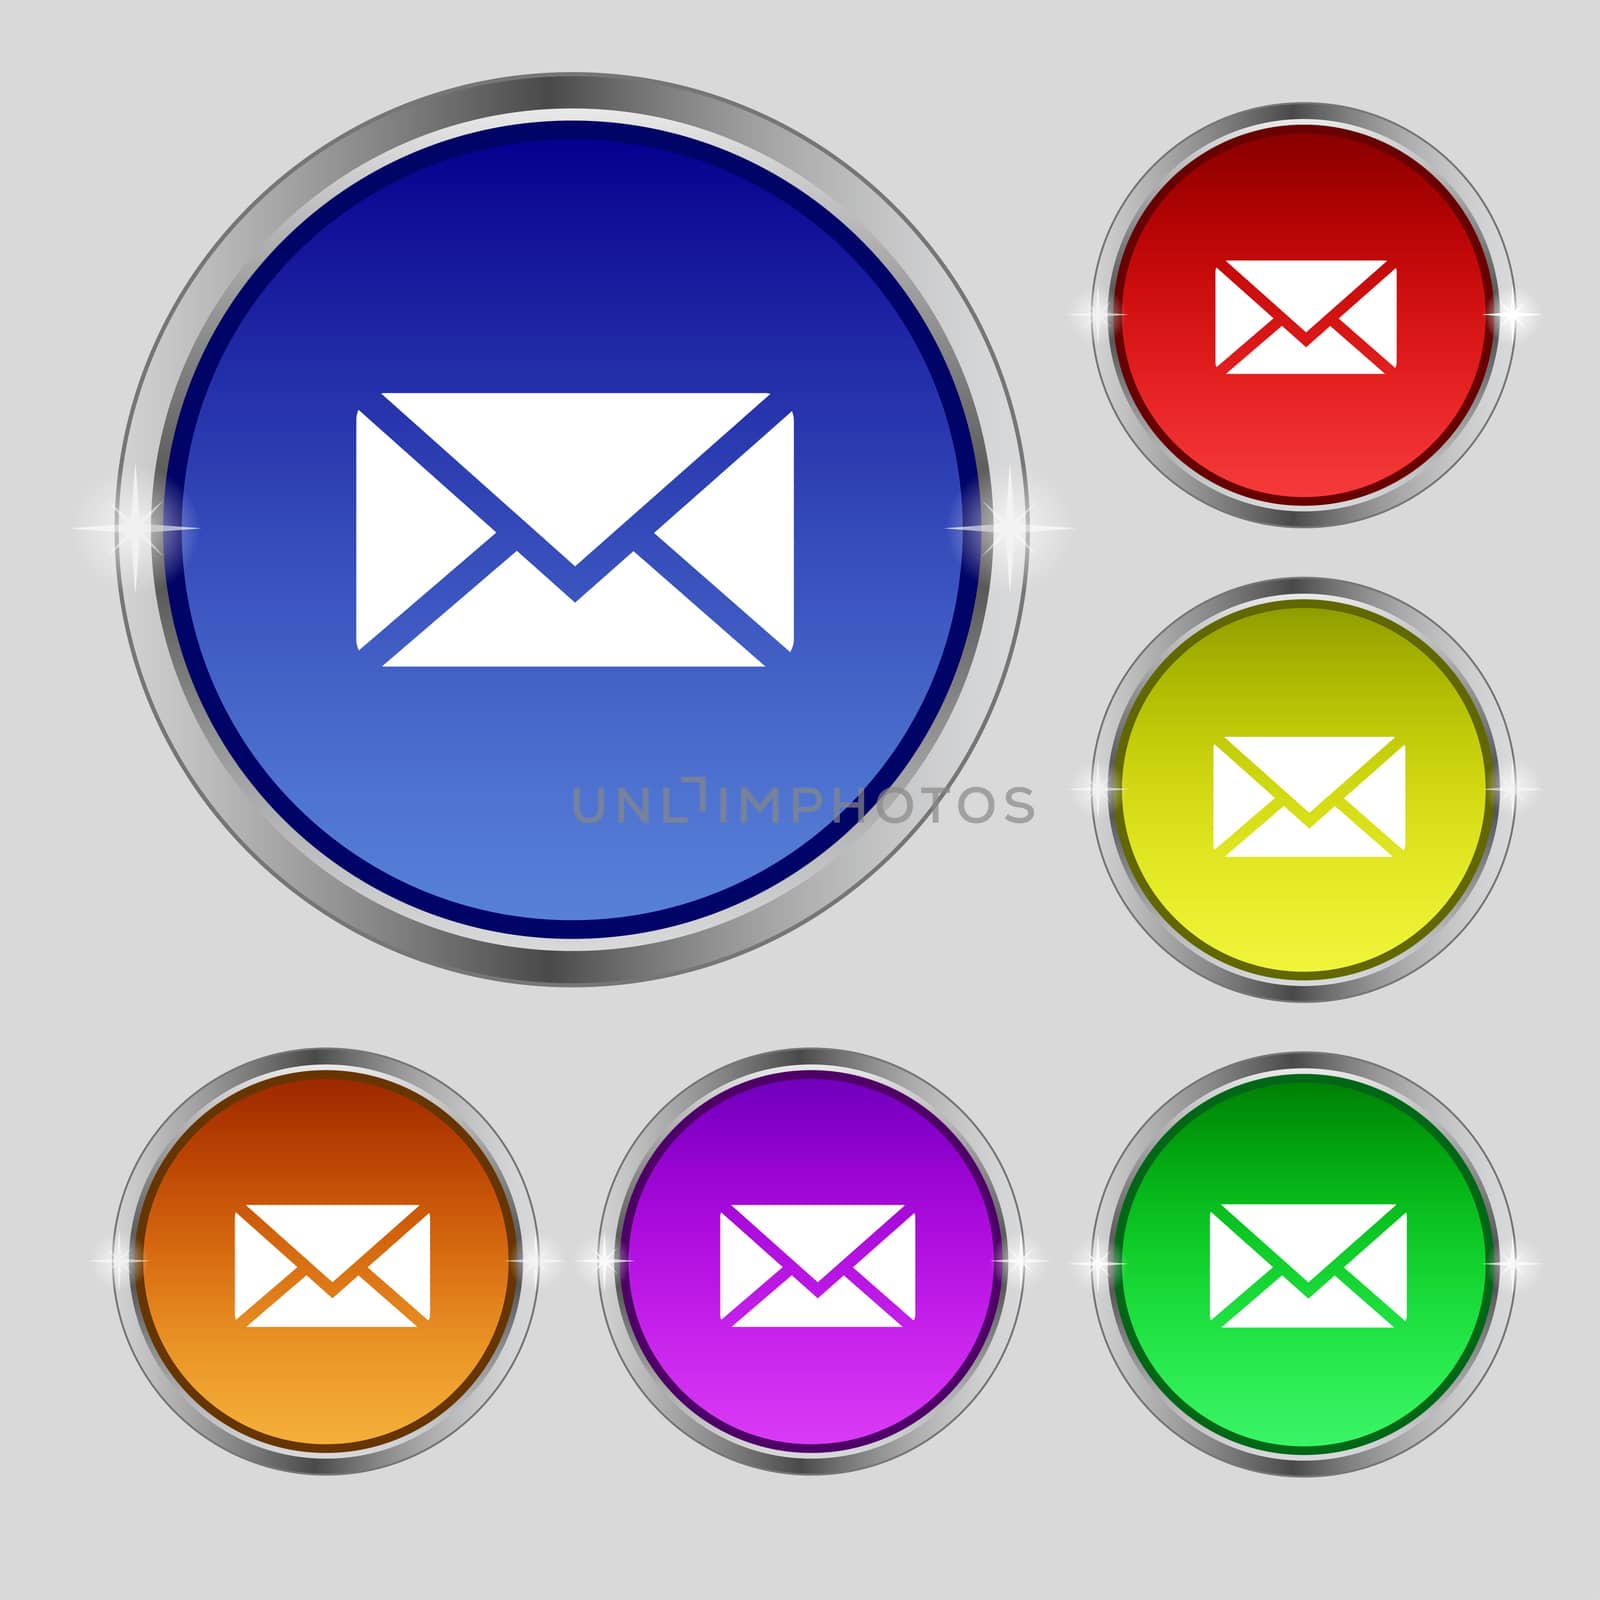 Mail, Envelope, Message icon sign. Round symbol on bright colourful buttons. illustration